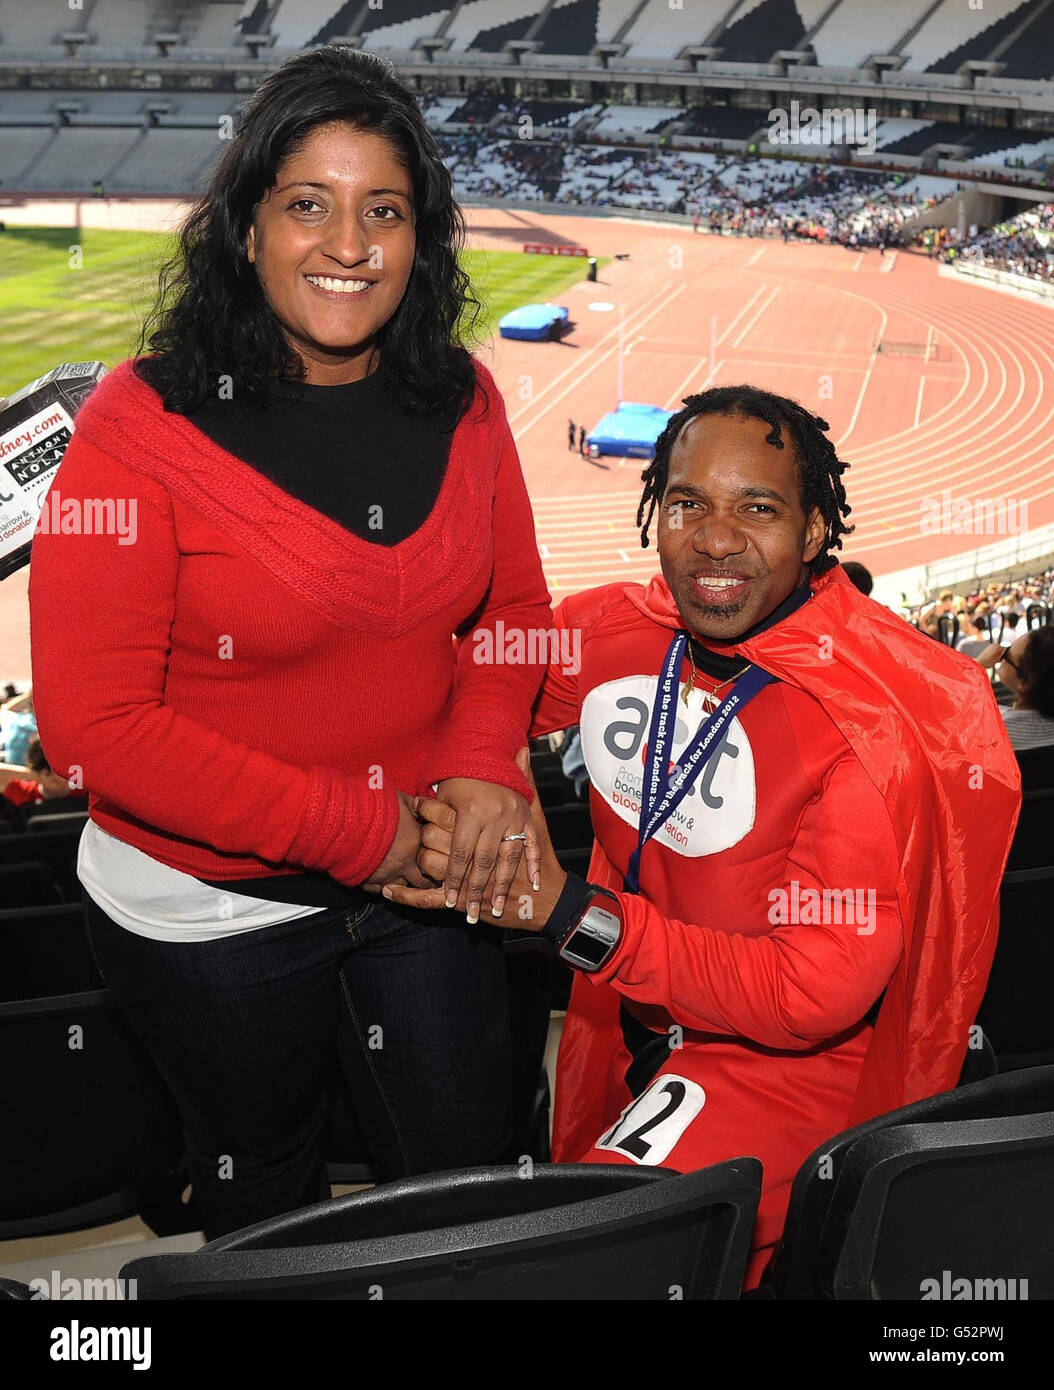 Wendell Raphael proposes marriage to his girlfriend Bindi Bhambra during the Gold Challenge event at the Olympic Stadium, London. Stock Photo